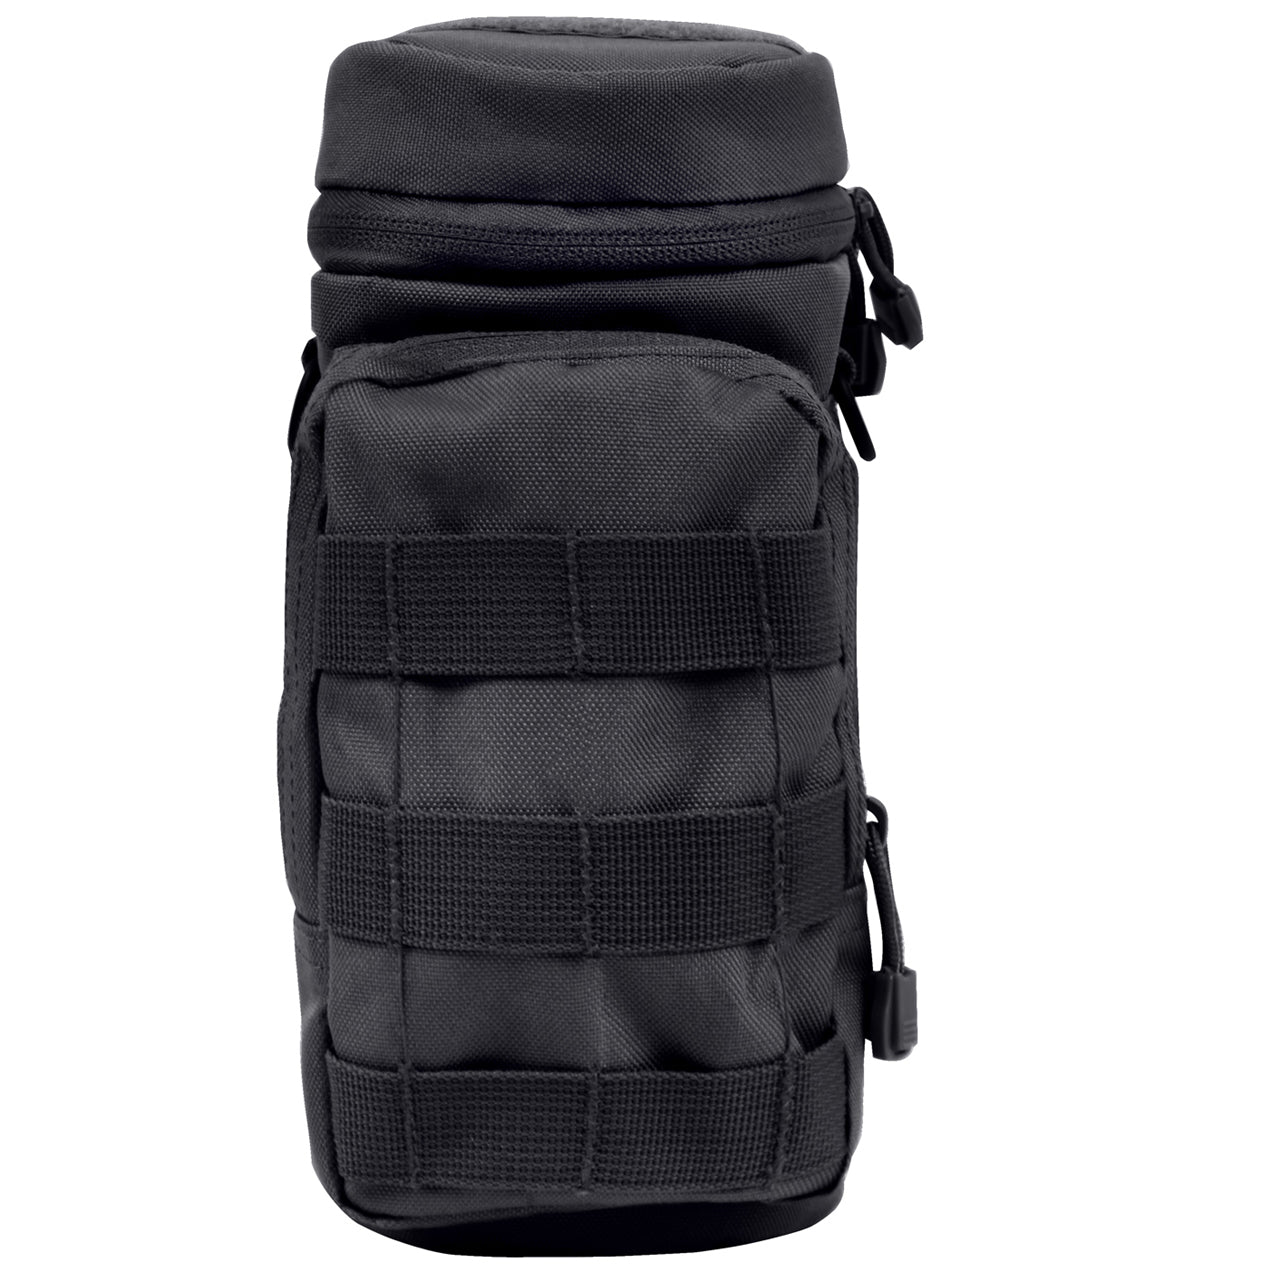 Durable Denier Polyester Material 10.5" Tall X 4" Diameter 6.5" X 4" Front Zippered Pouch W/ MOLLE Loops On Front Zipper Closure Flip Top And Two MOLLE Straps On Back D-Ring On Each Side Straw Hole On Top W/ Hook And Loop Closure Features A Drain Hole 4" X 1" Loop On Top And MOLLE Loop Around Entire Pouch www.moralepatches.com.au